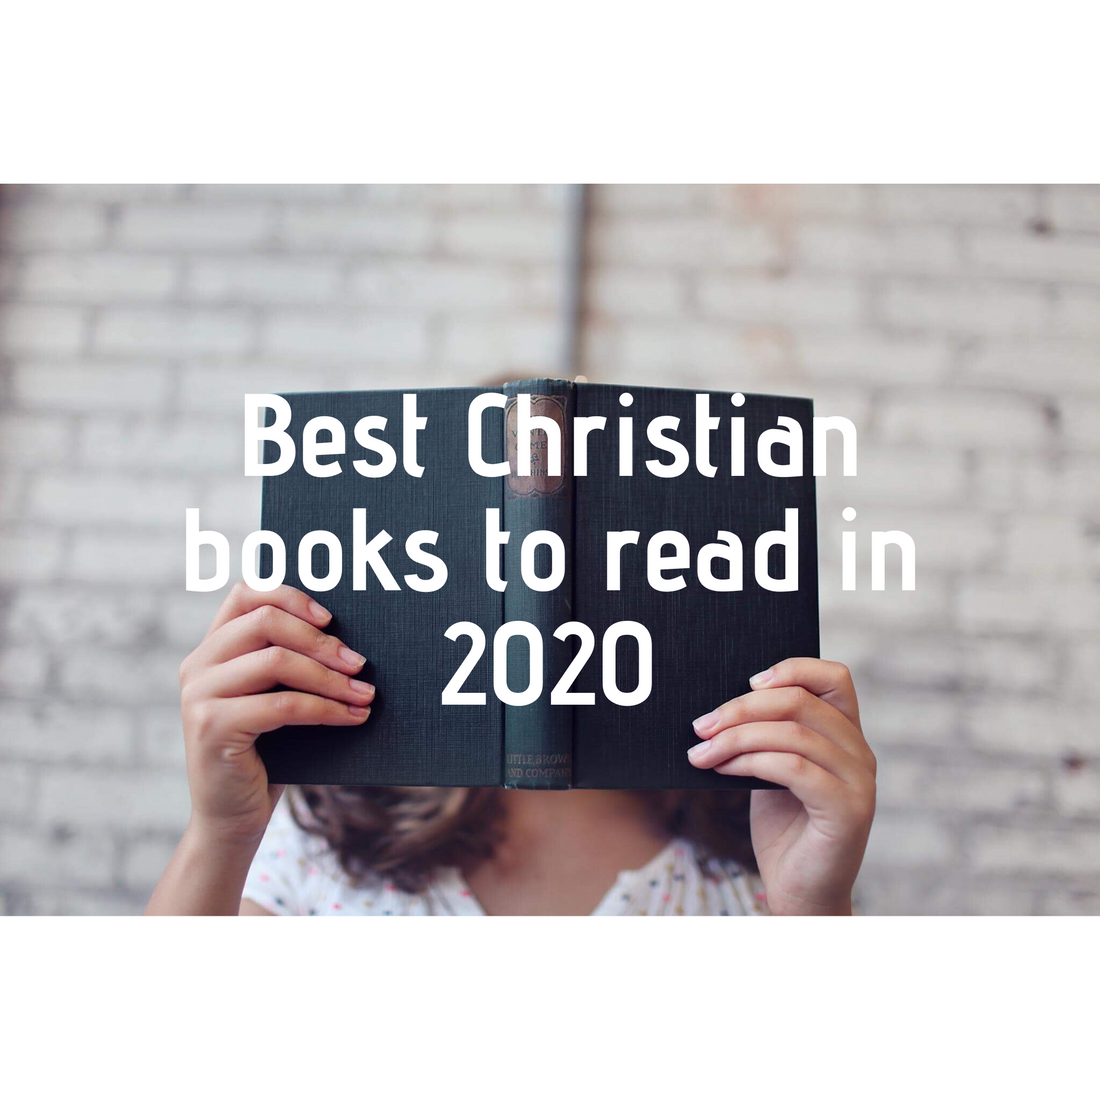 Best Christian books to read in 2020